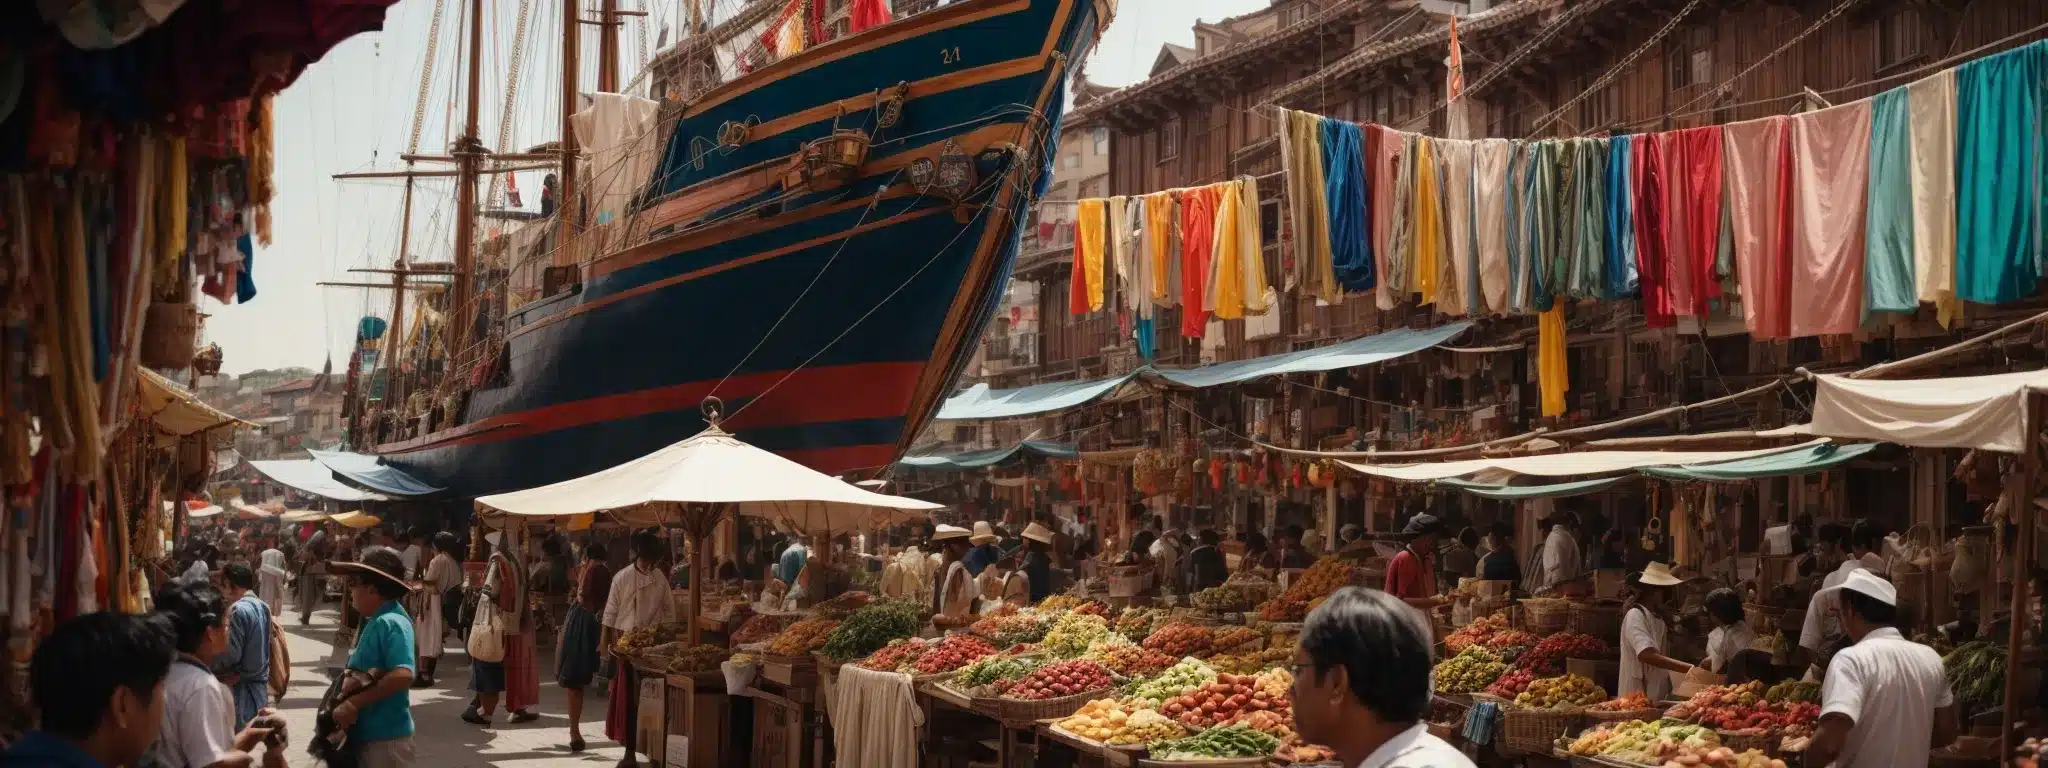 A Sailing Ship Navigates Through A Bustling Outdoor Market Filled With Colorful Stalls And Vibrant Activity.